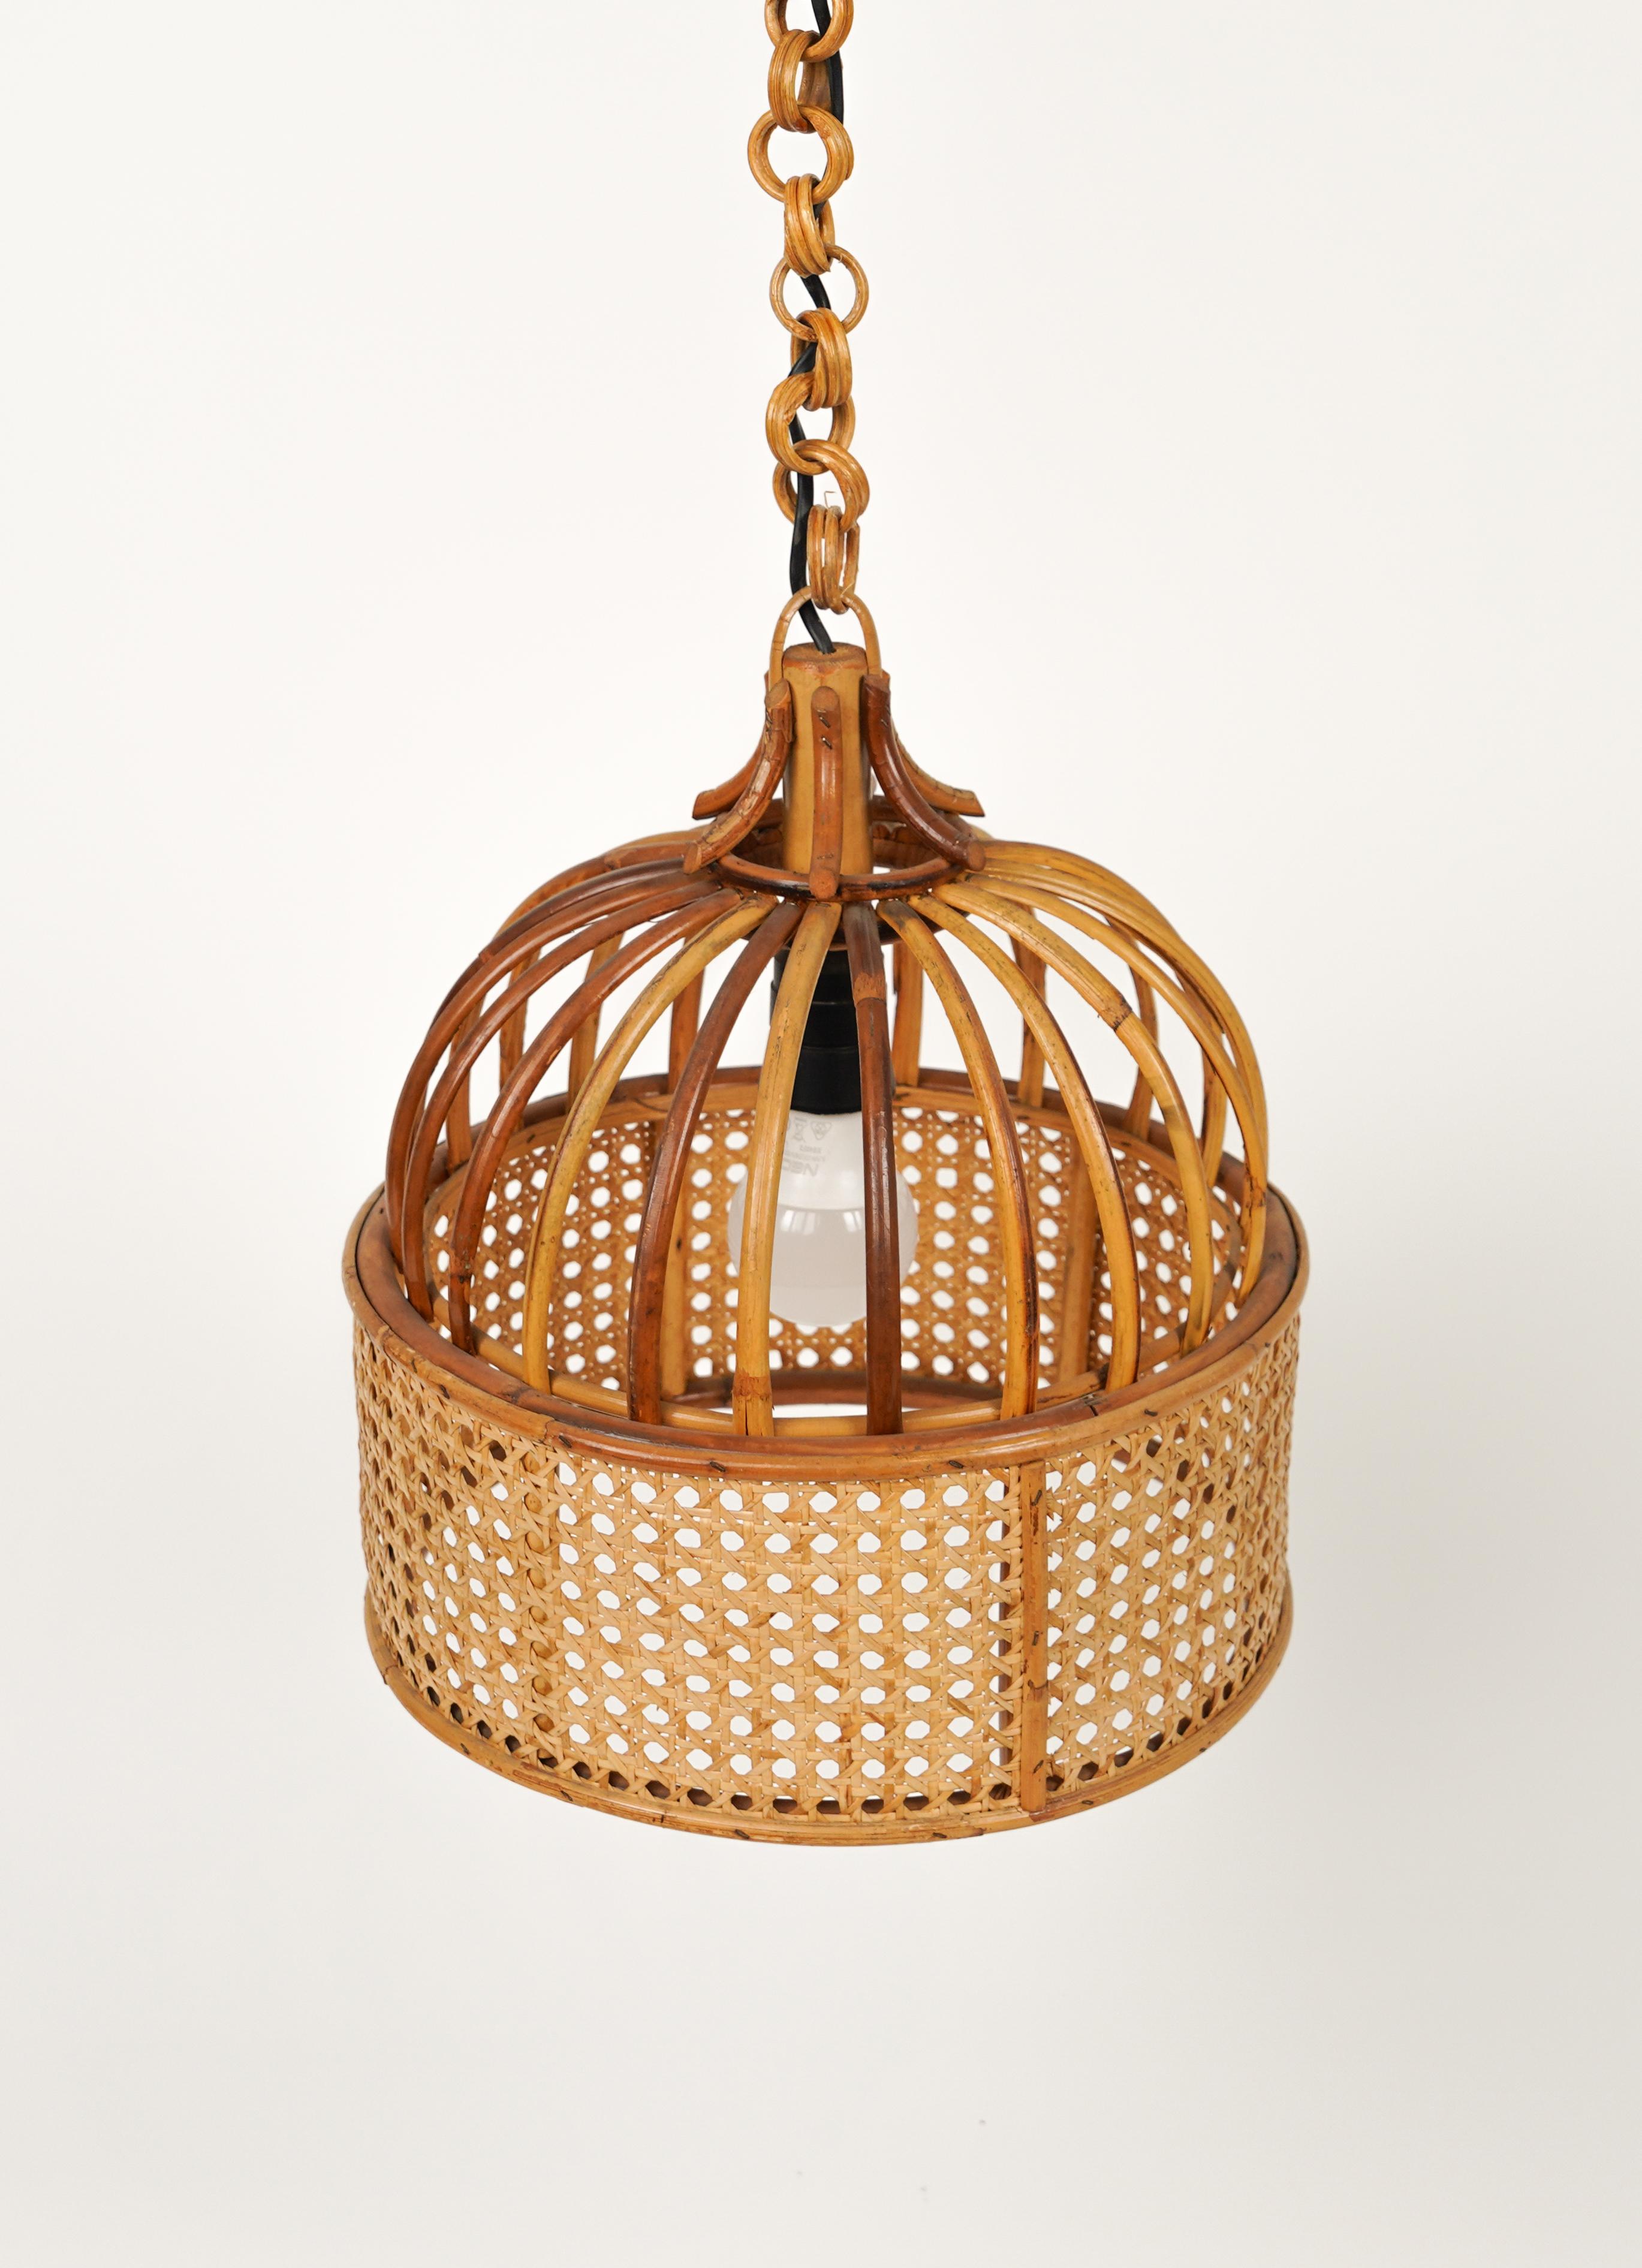 Midcentury French Riviera Rattan and Wicker Chandelier, Italy 1970s In Good Condition For Sale In Rome, IT